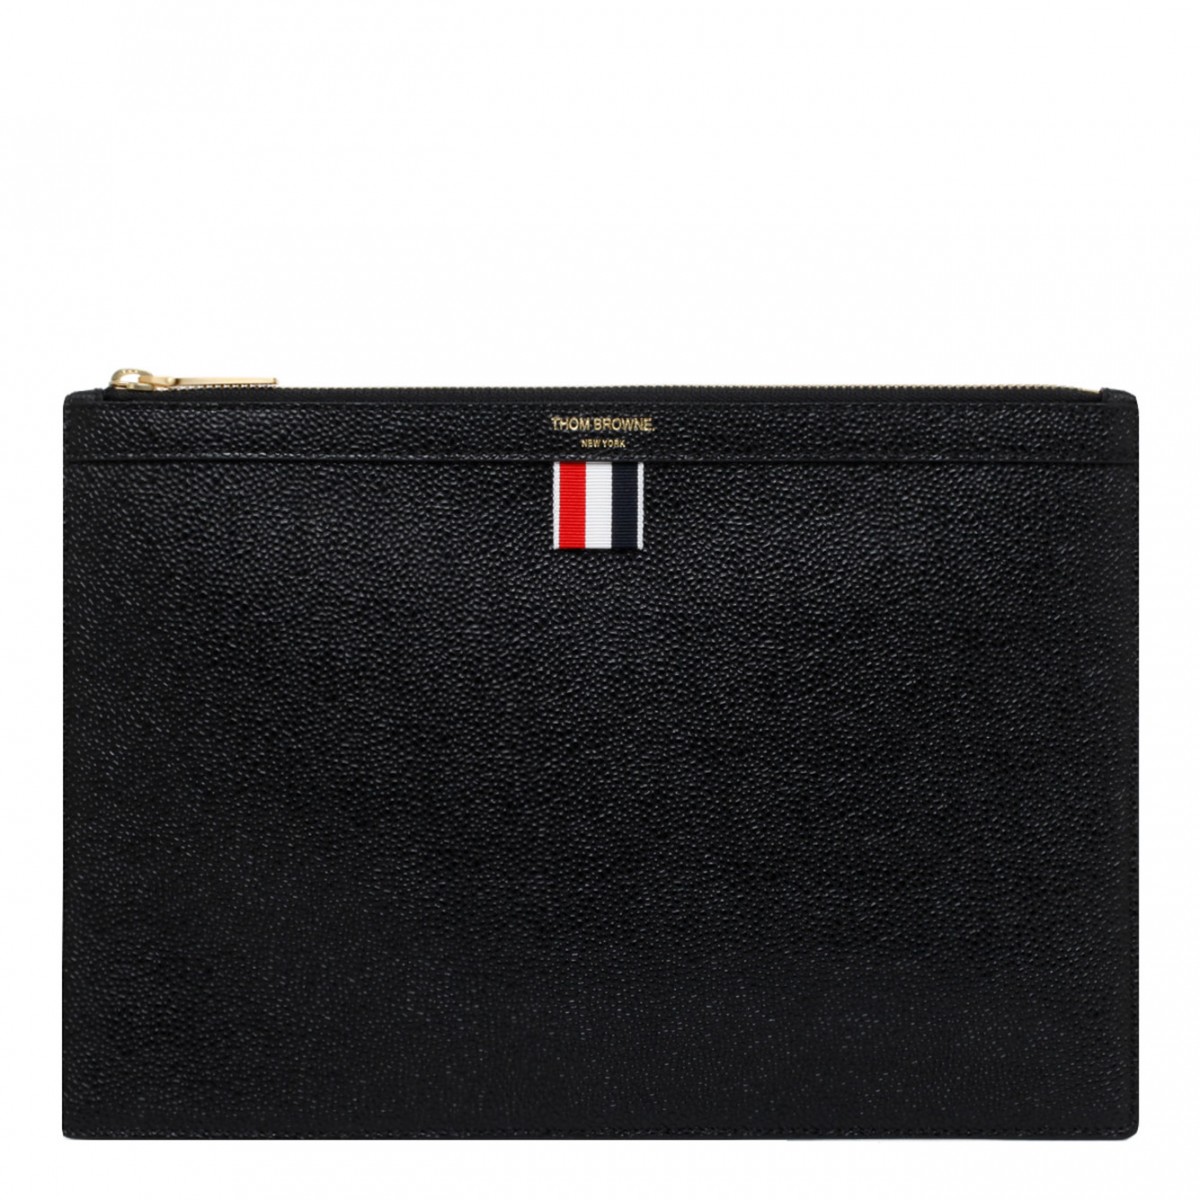 Black Small Tablet Clutch